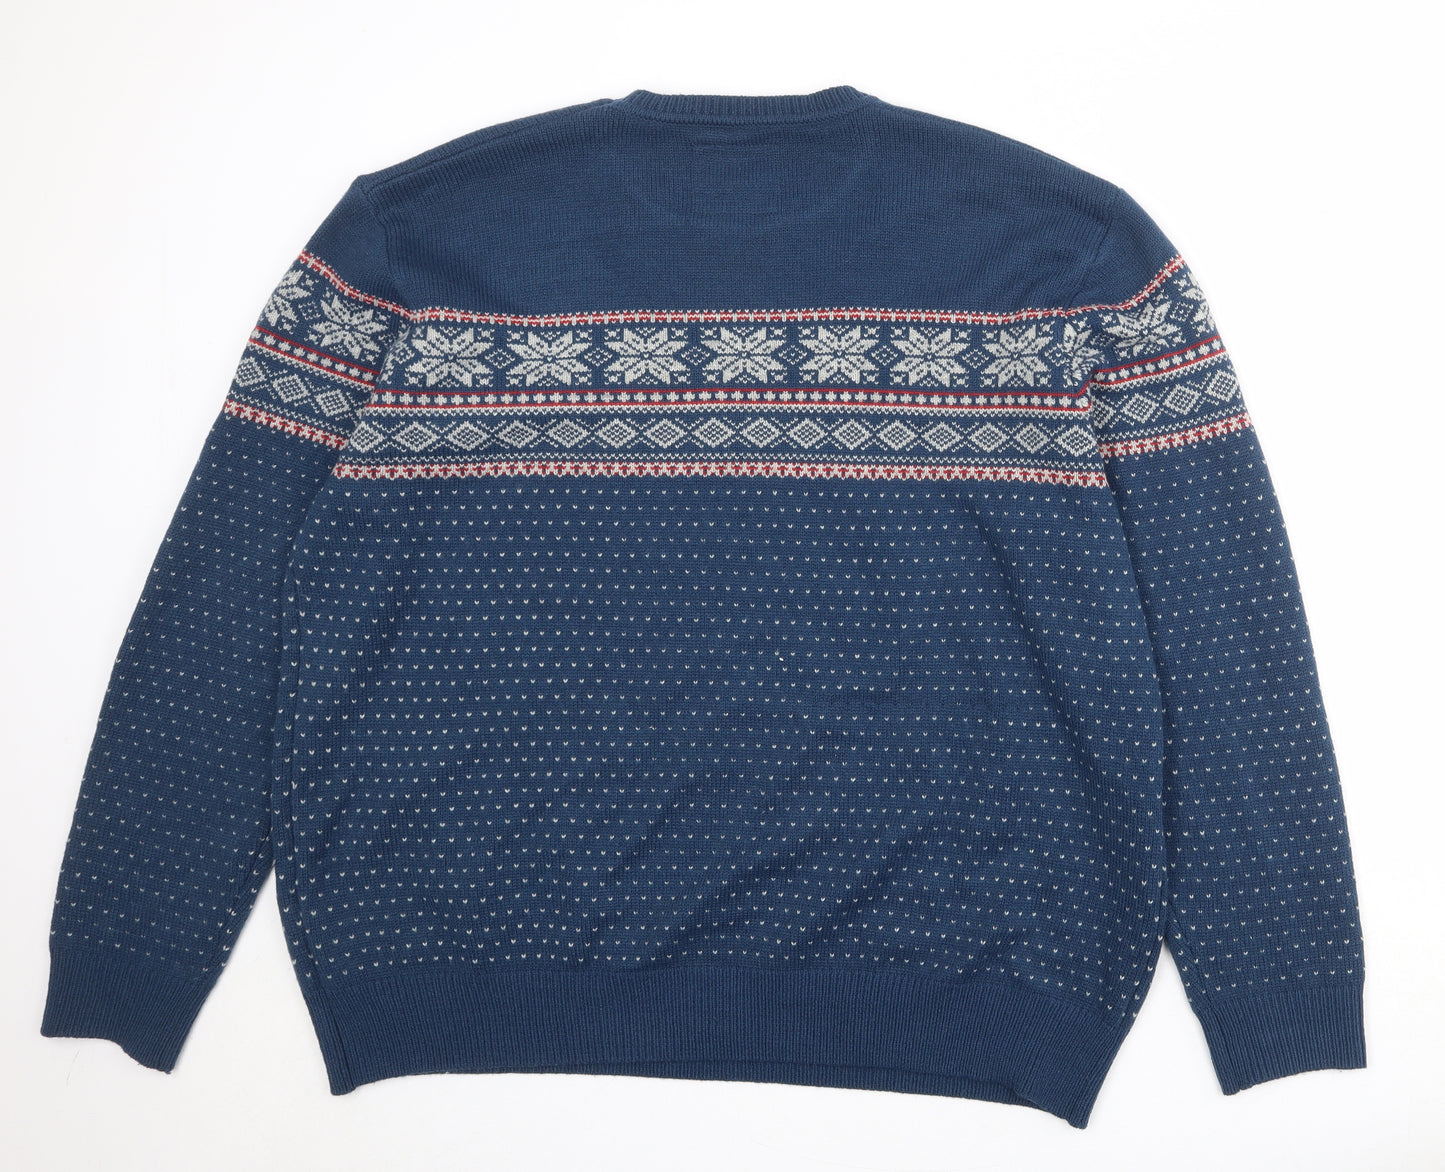 Red Herring Mens Blue Round Neck Fair Isle Acrylic Pullover Jumper Size 2XL Long Sleeve